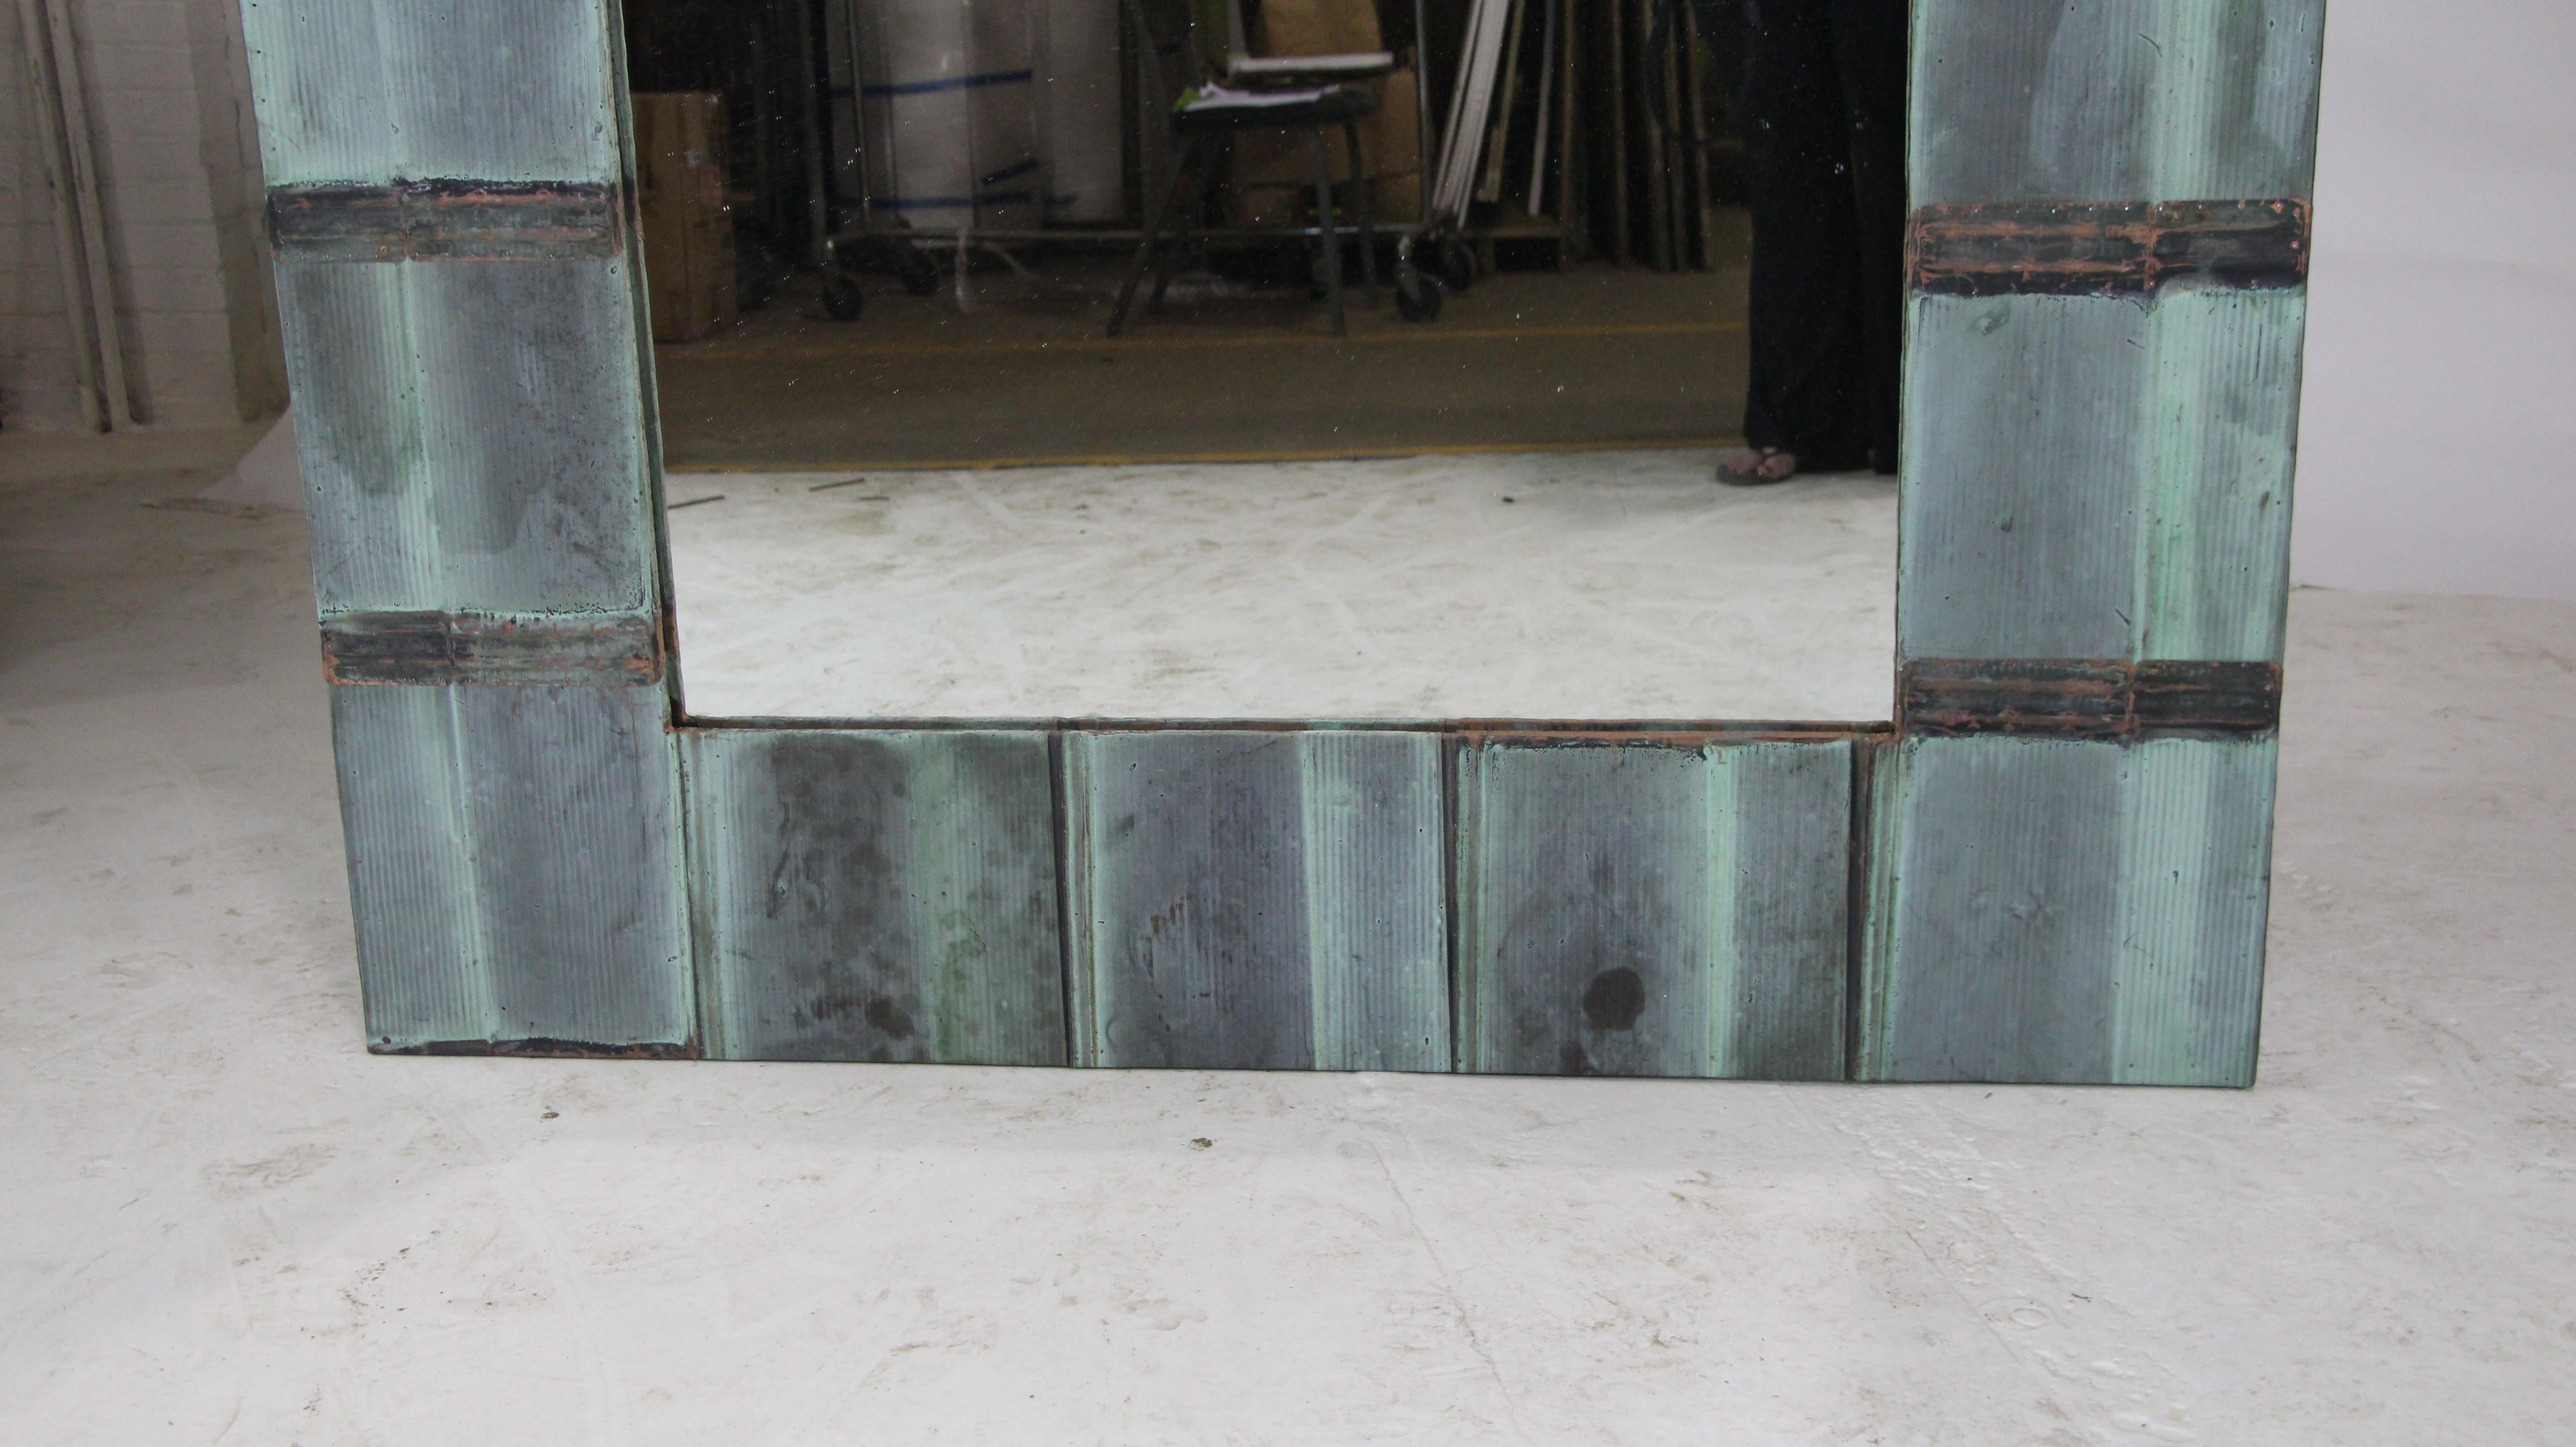 Industrial Large Mirror w/Original Patina Copper Roof from Early 1900s Church Steeple